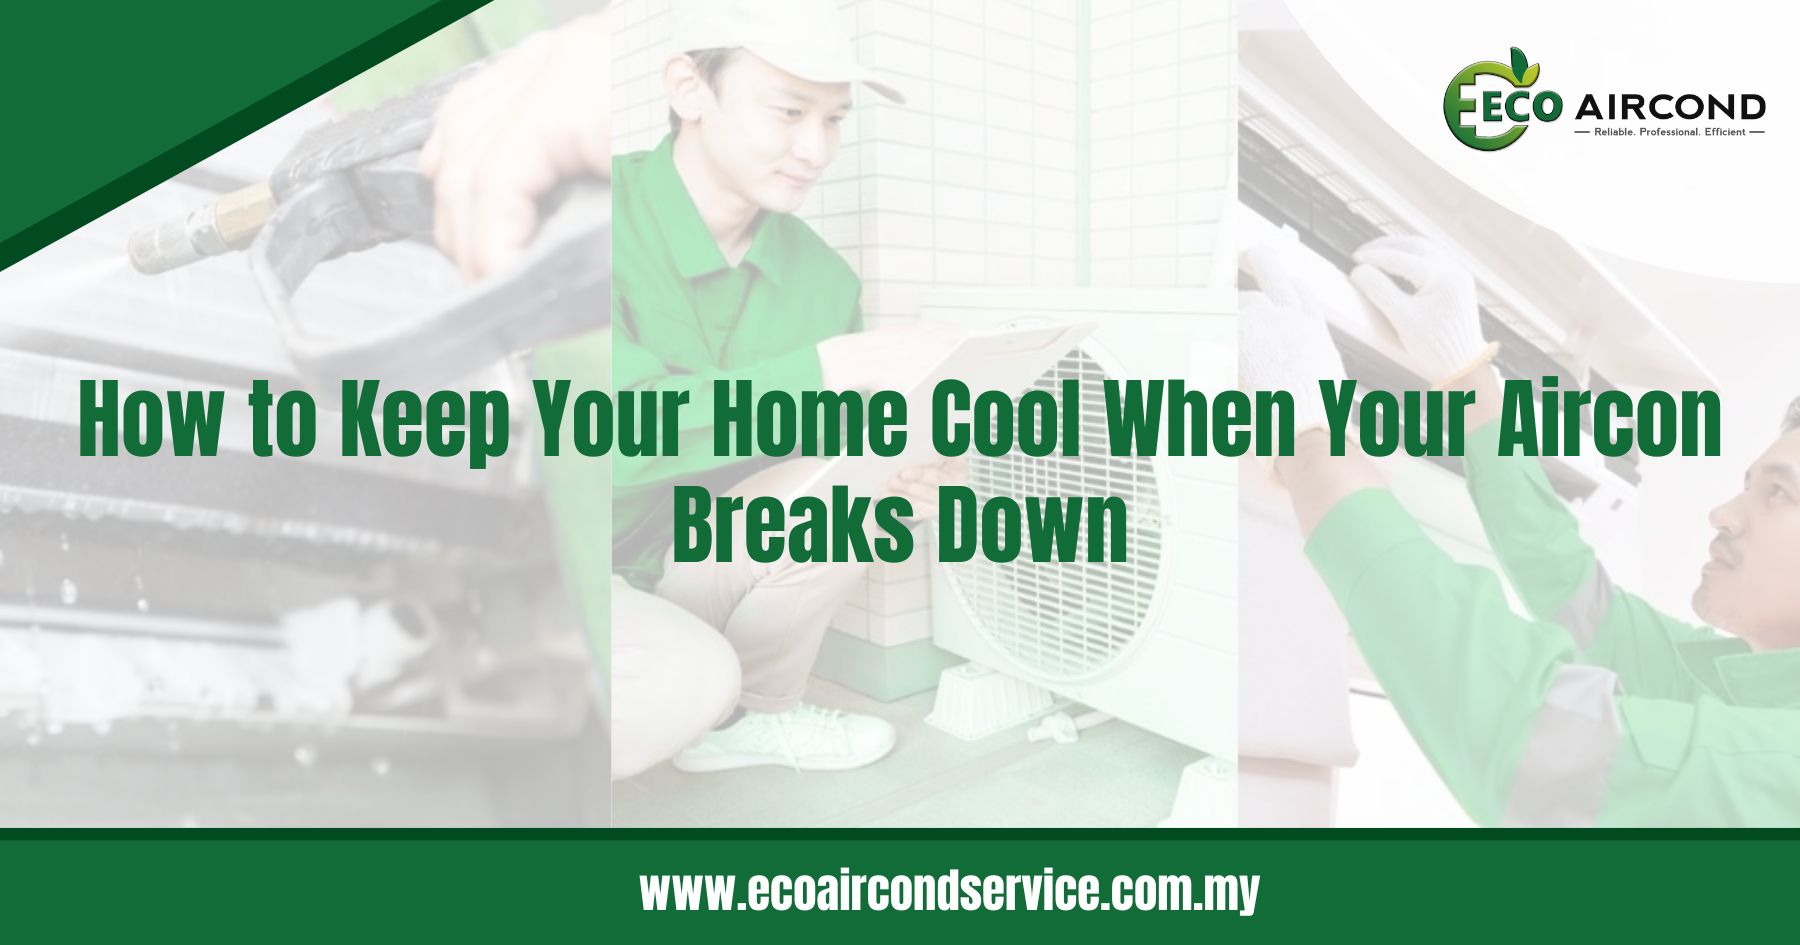 How to Keep Your Home Cool When Your Aircon Breaks Down